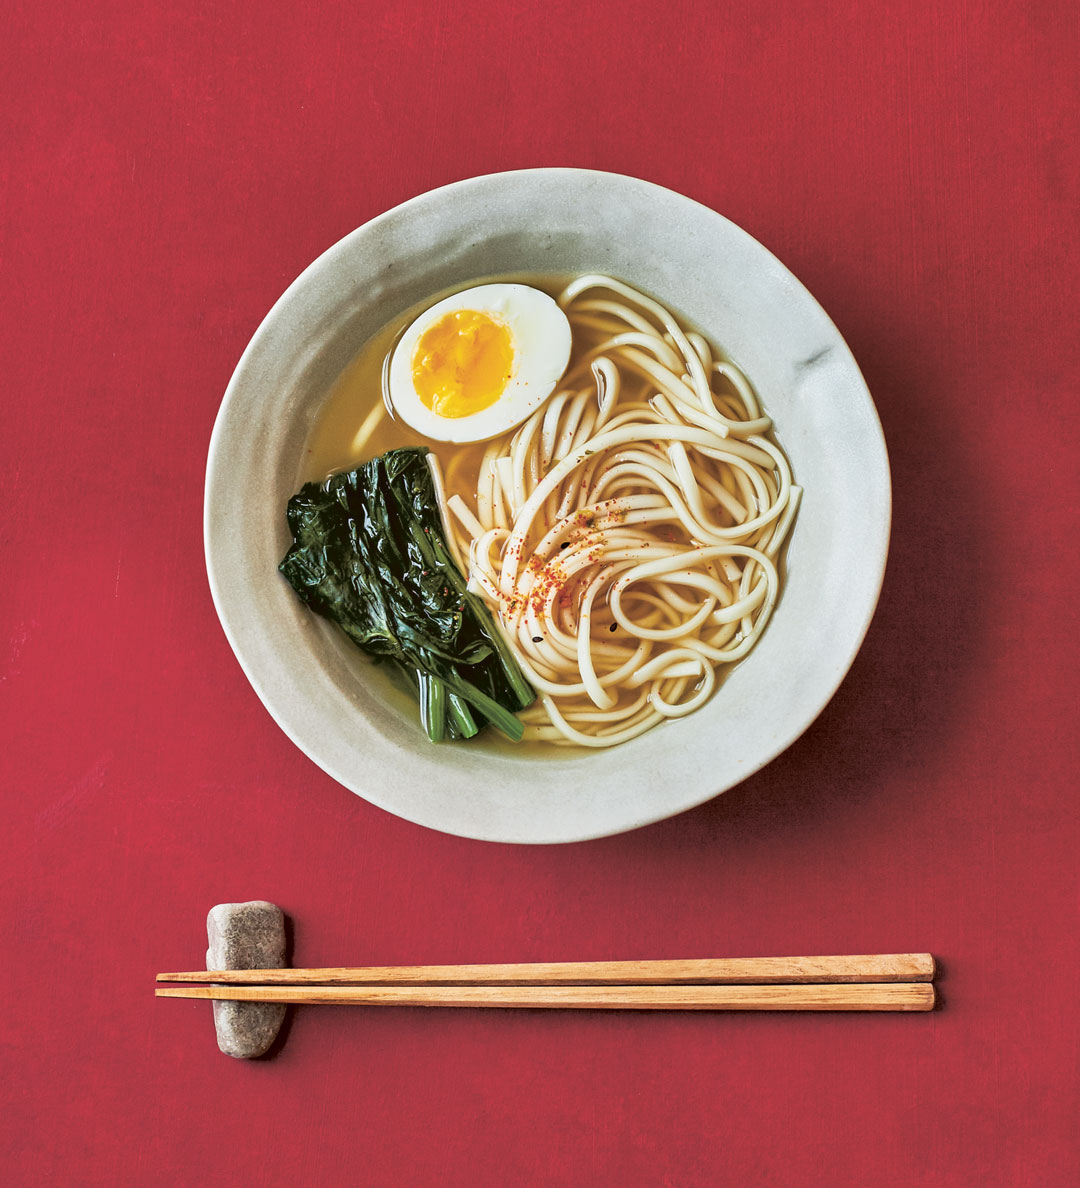 Spinach and udon soup with a sprinkle of shichimi togarashi, as featured in Japan the Cookbook.